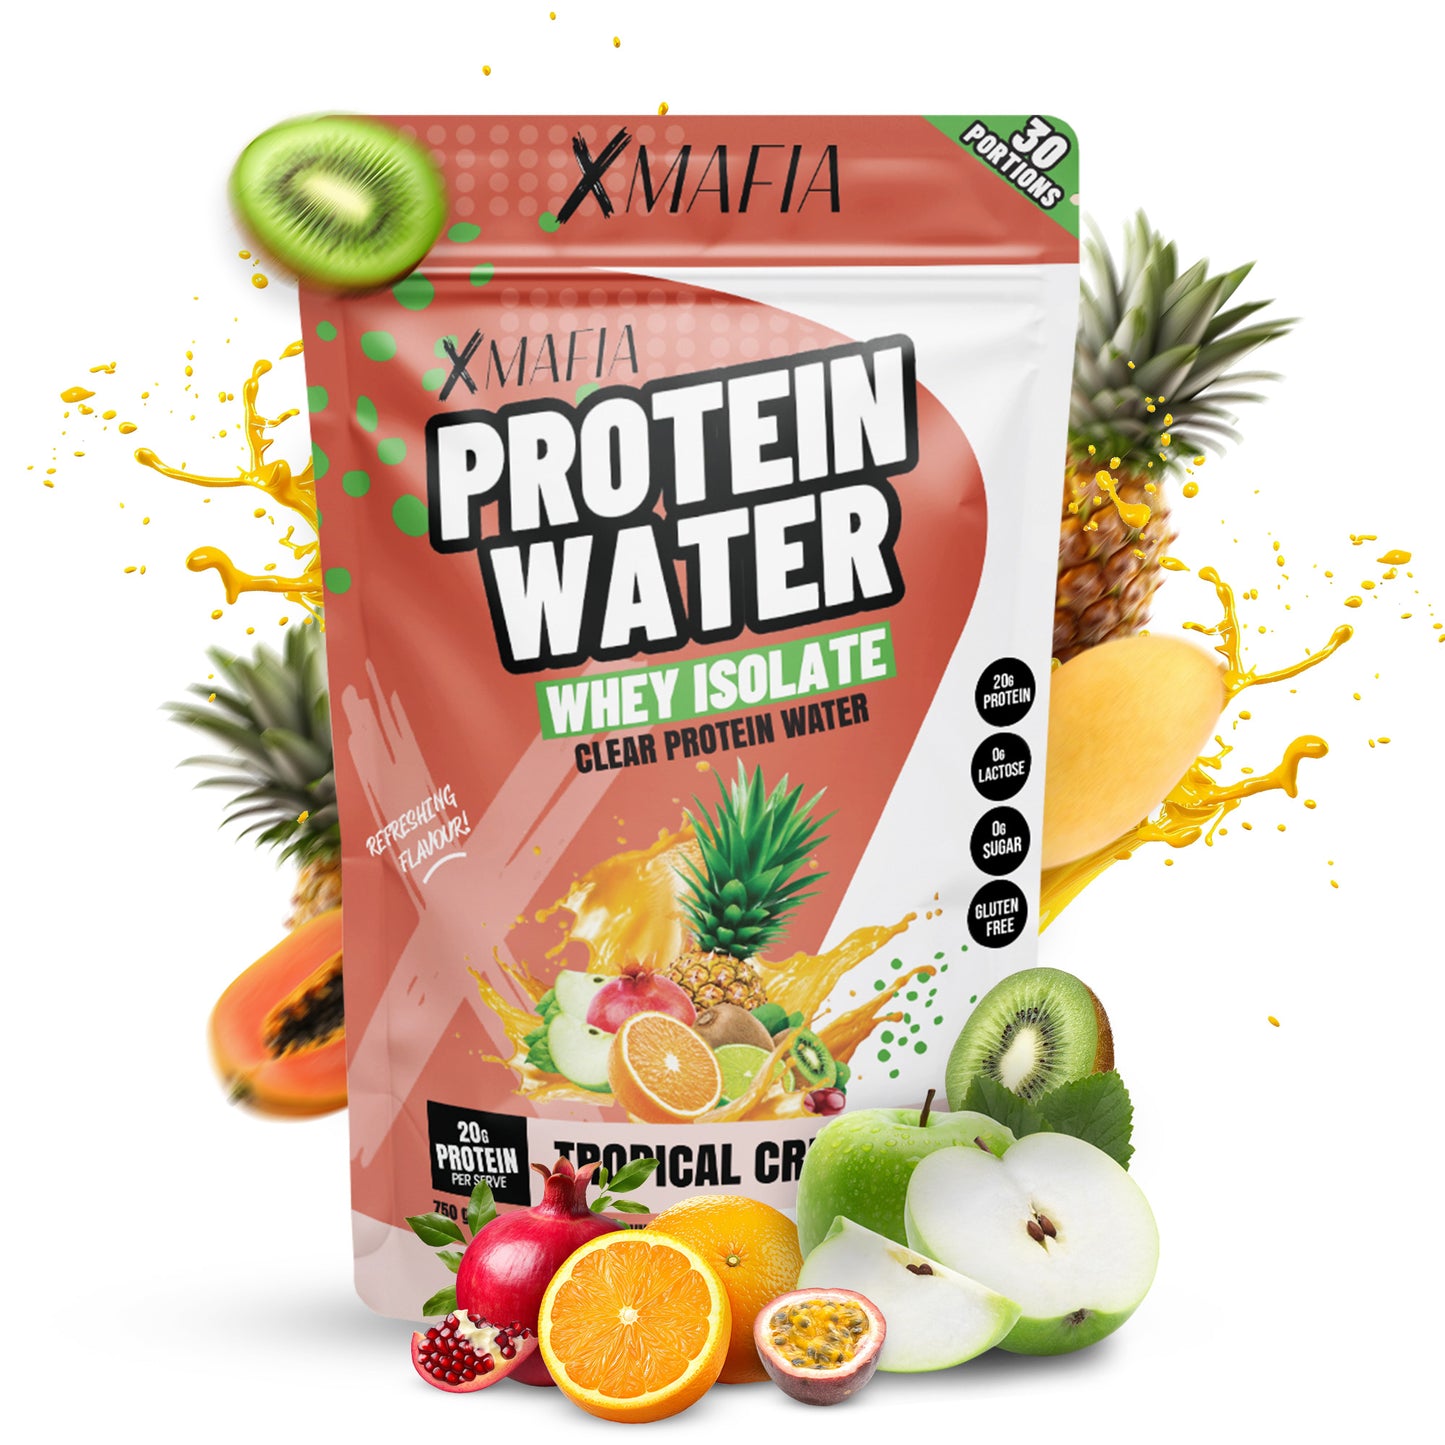 Protein Water - Tropical Crush. - XMAFIA - Supplements